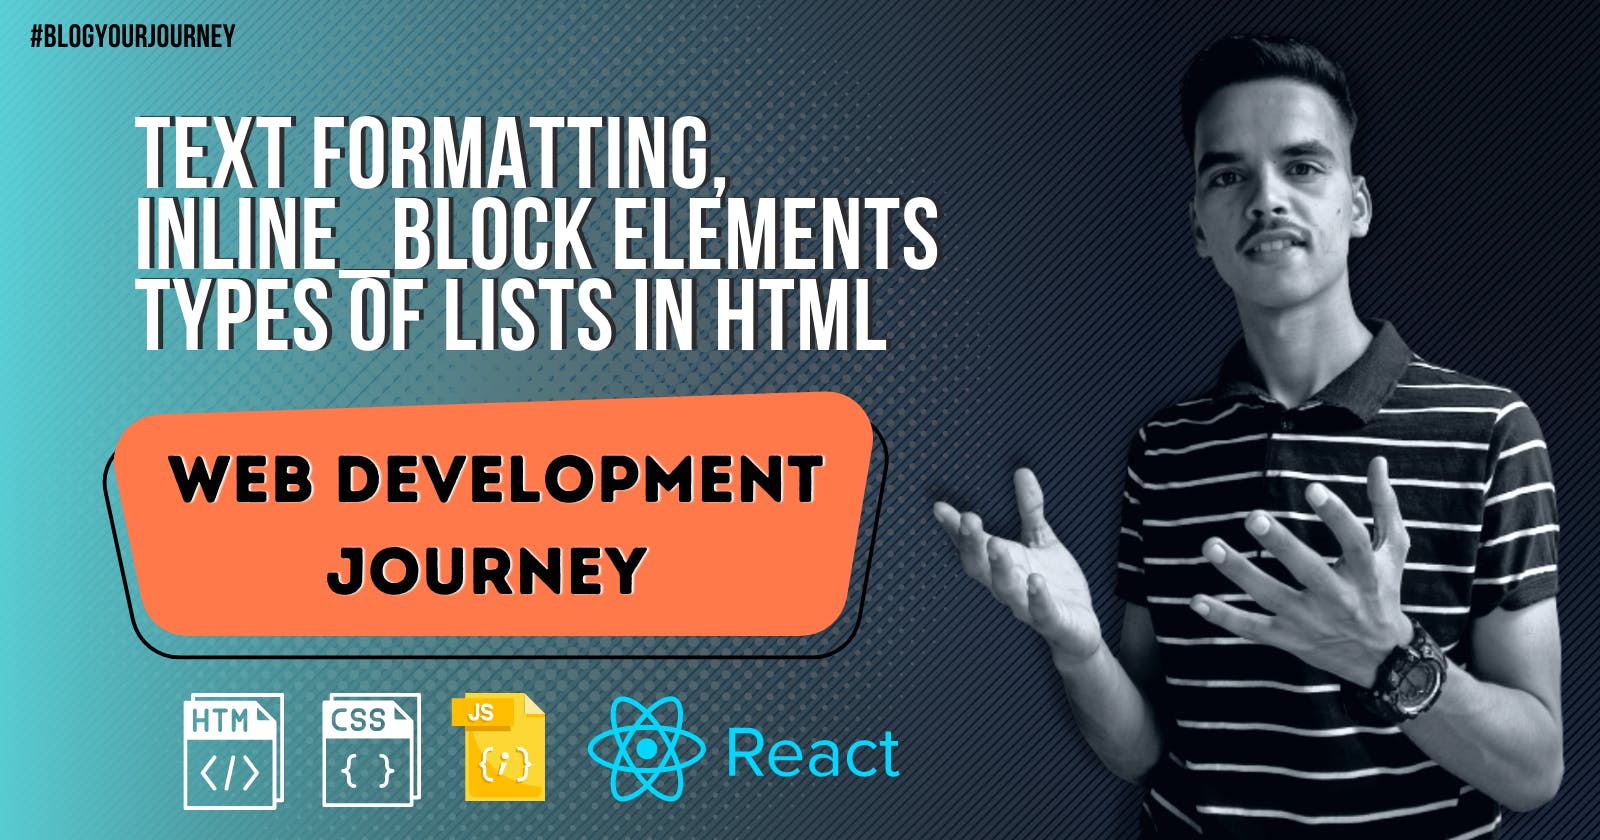 ⏩Text Formatting,Inline_block Elements , and Types of Lists in HTML